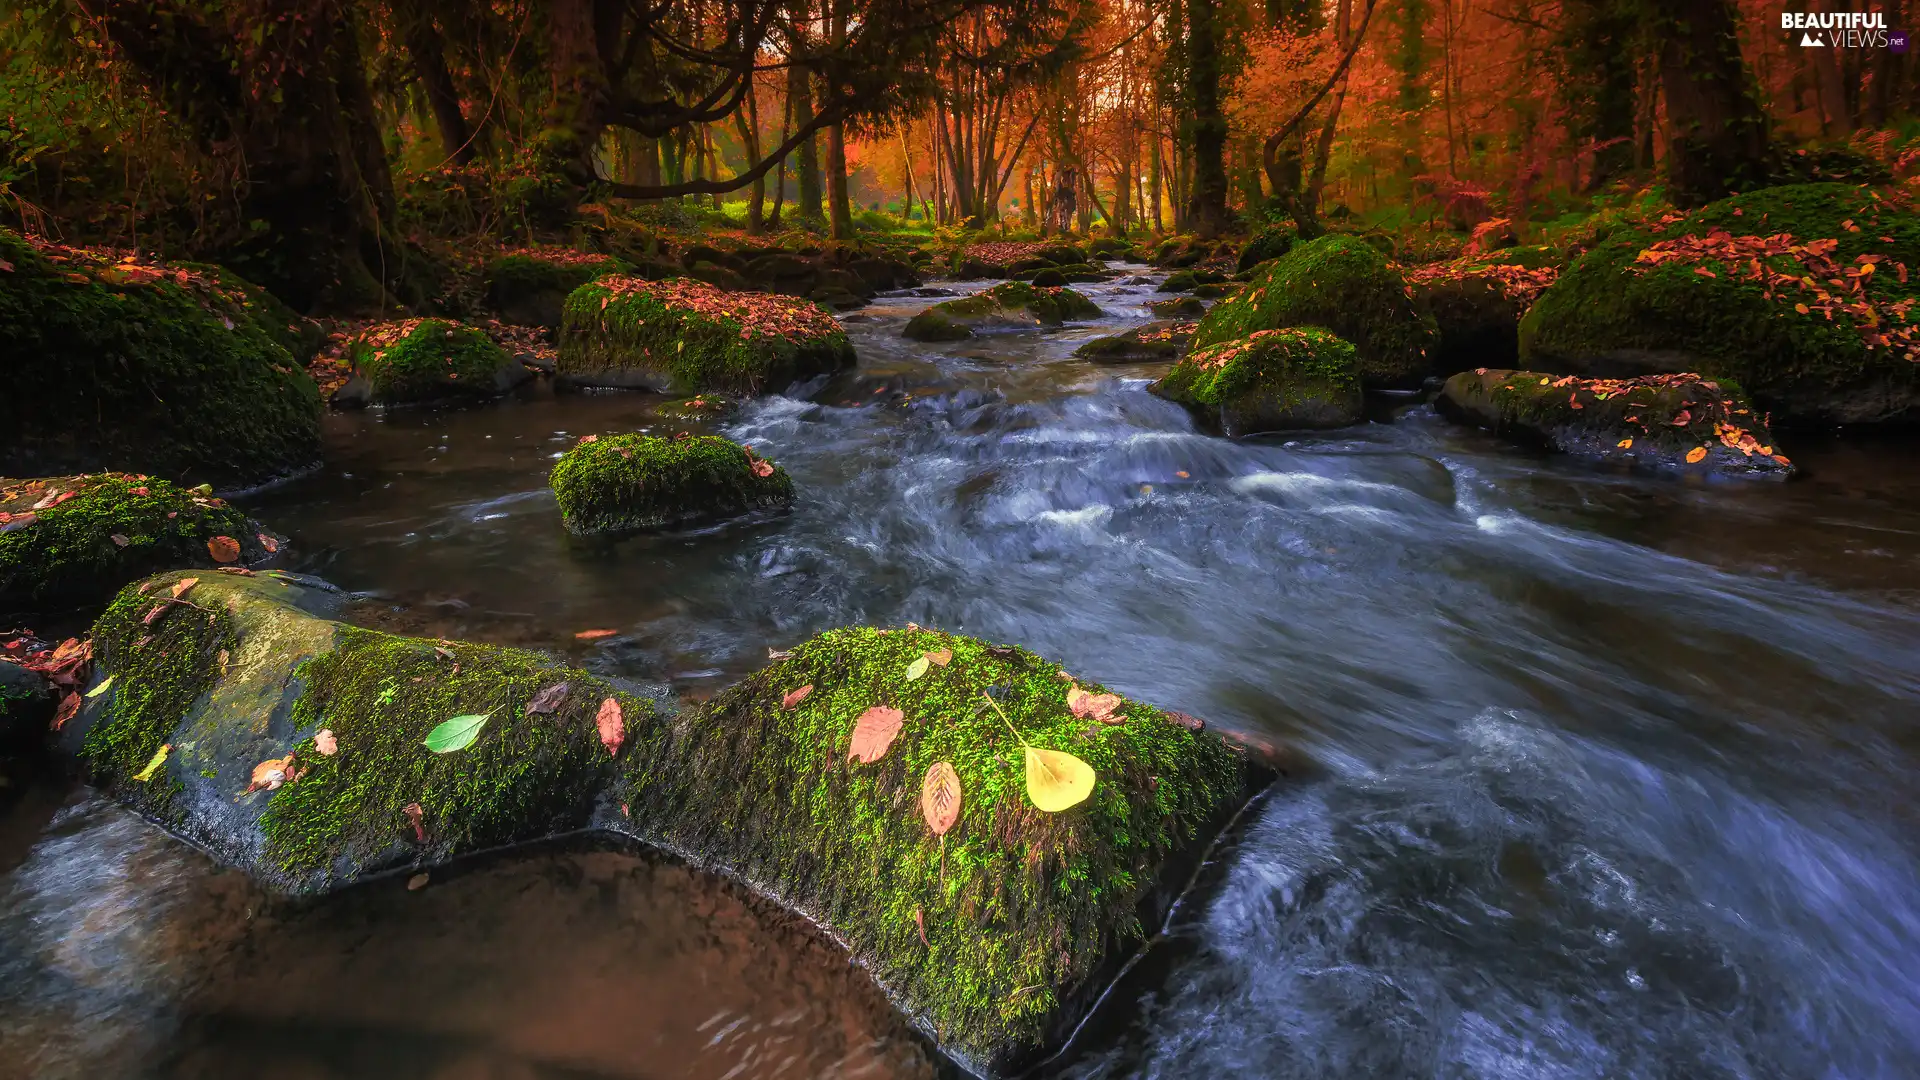 River, Brittany, forest, Leaf, trees, France, River Rance, autumn, Stones, viewes